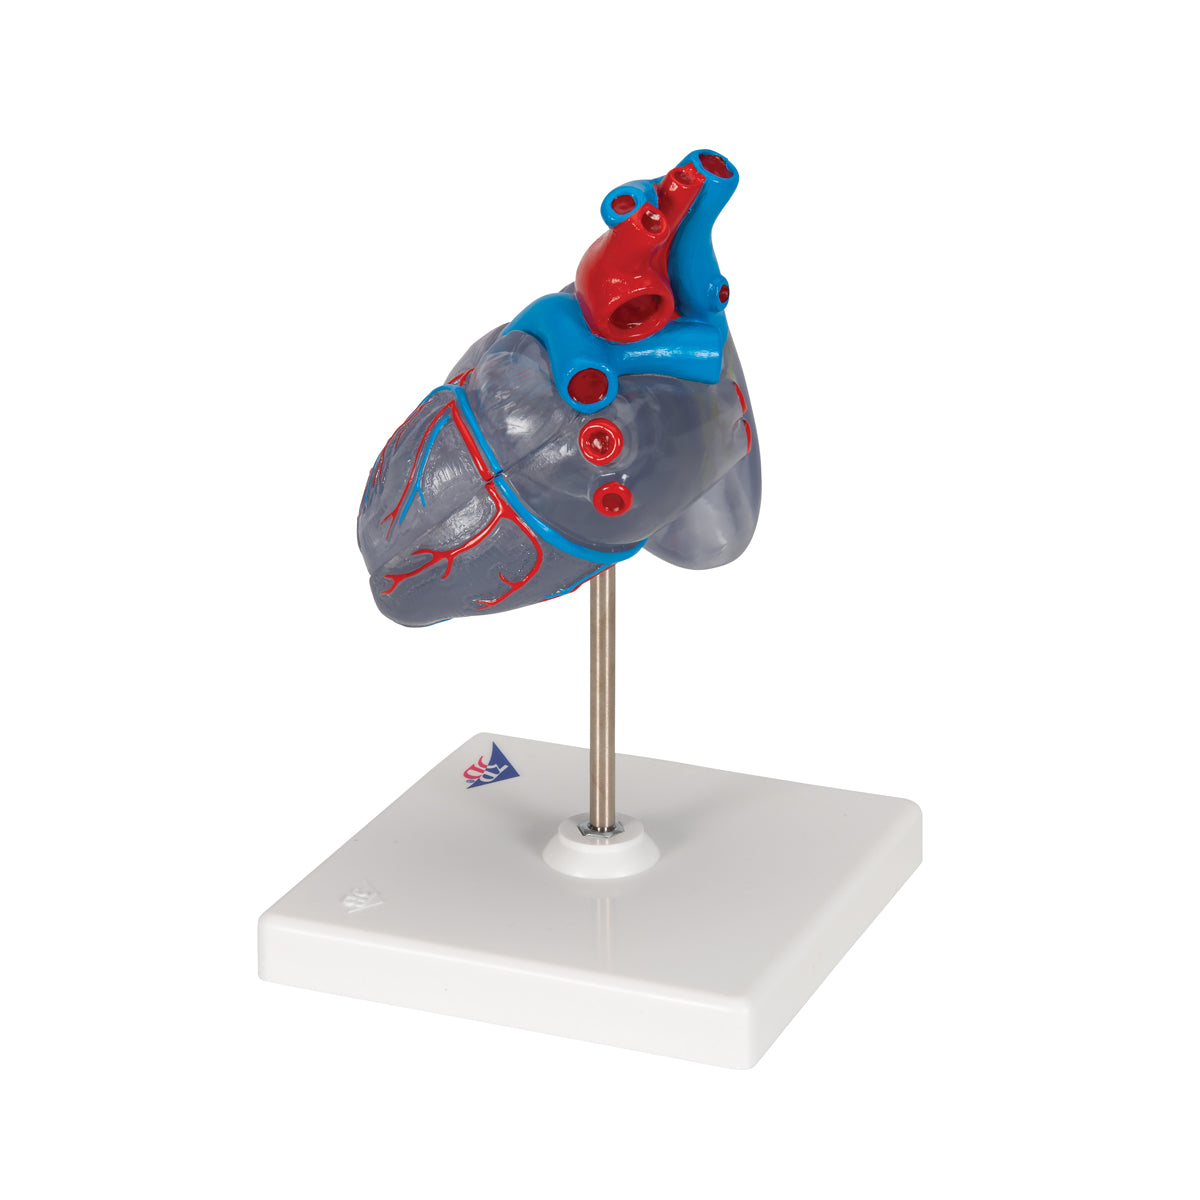 Scaled and transparent heart model with the impulse conduction system